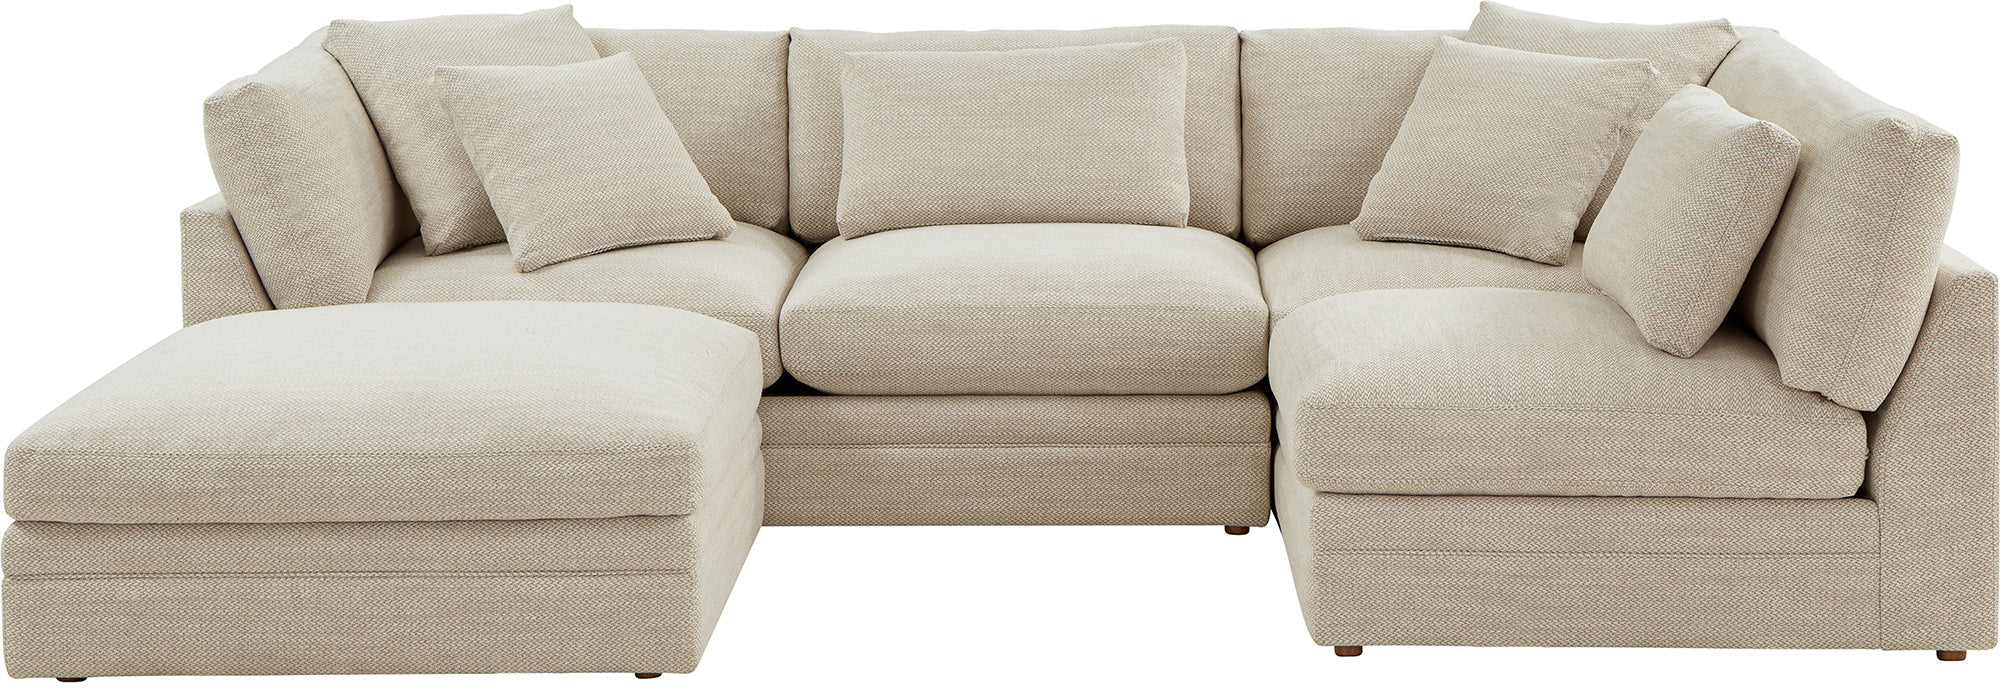 Feel Good Sectional with Ottoman, Right, Oyster - Image 7